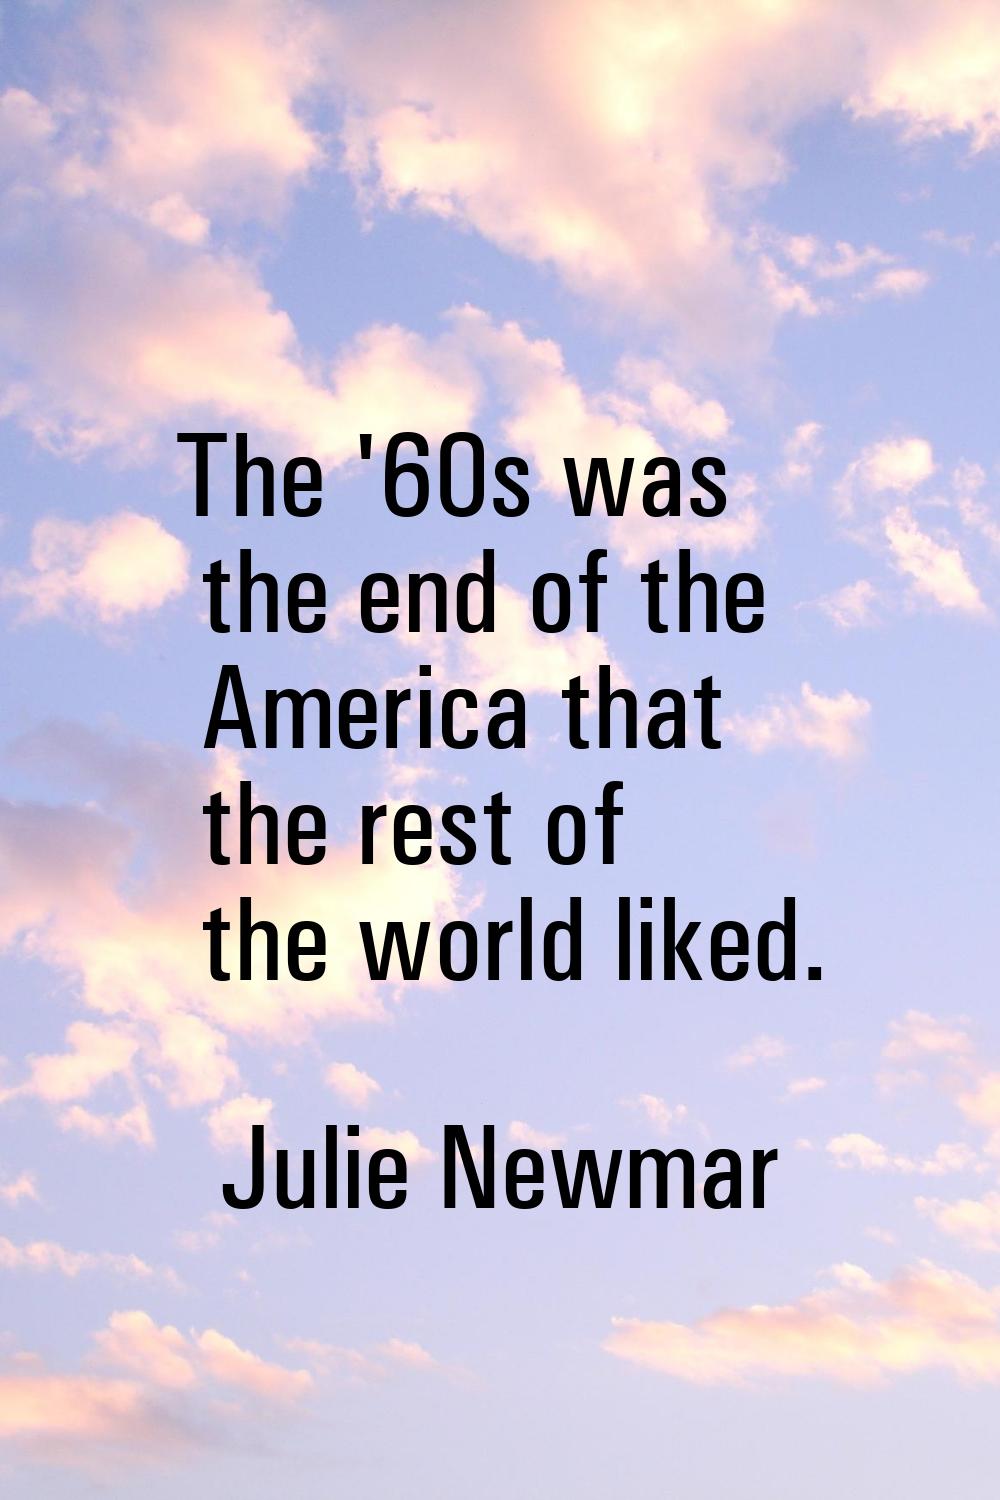 The '60s was the end of the America that the rest of the world liked.